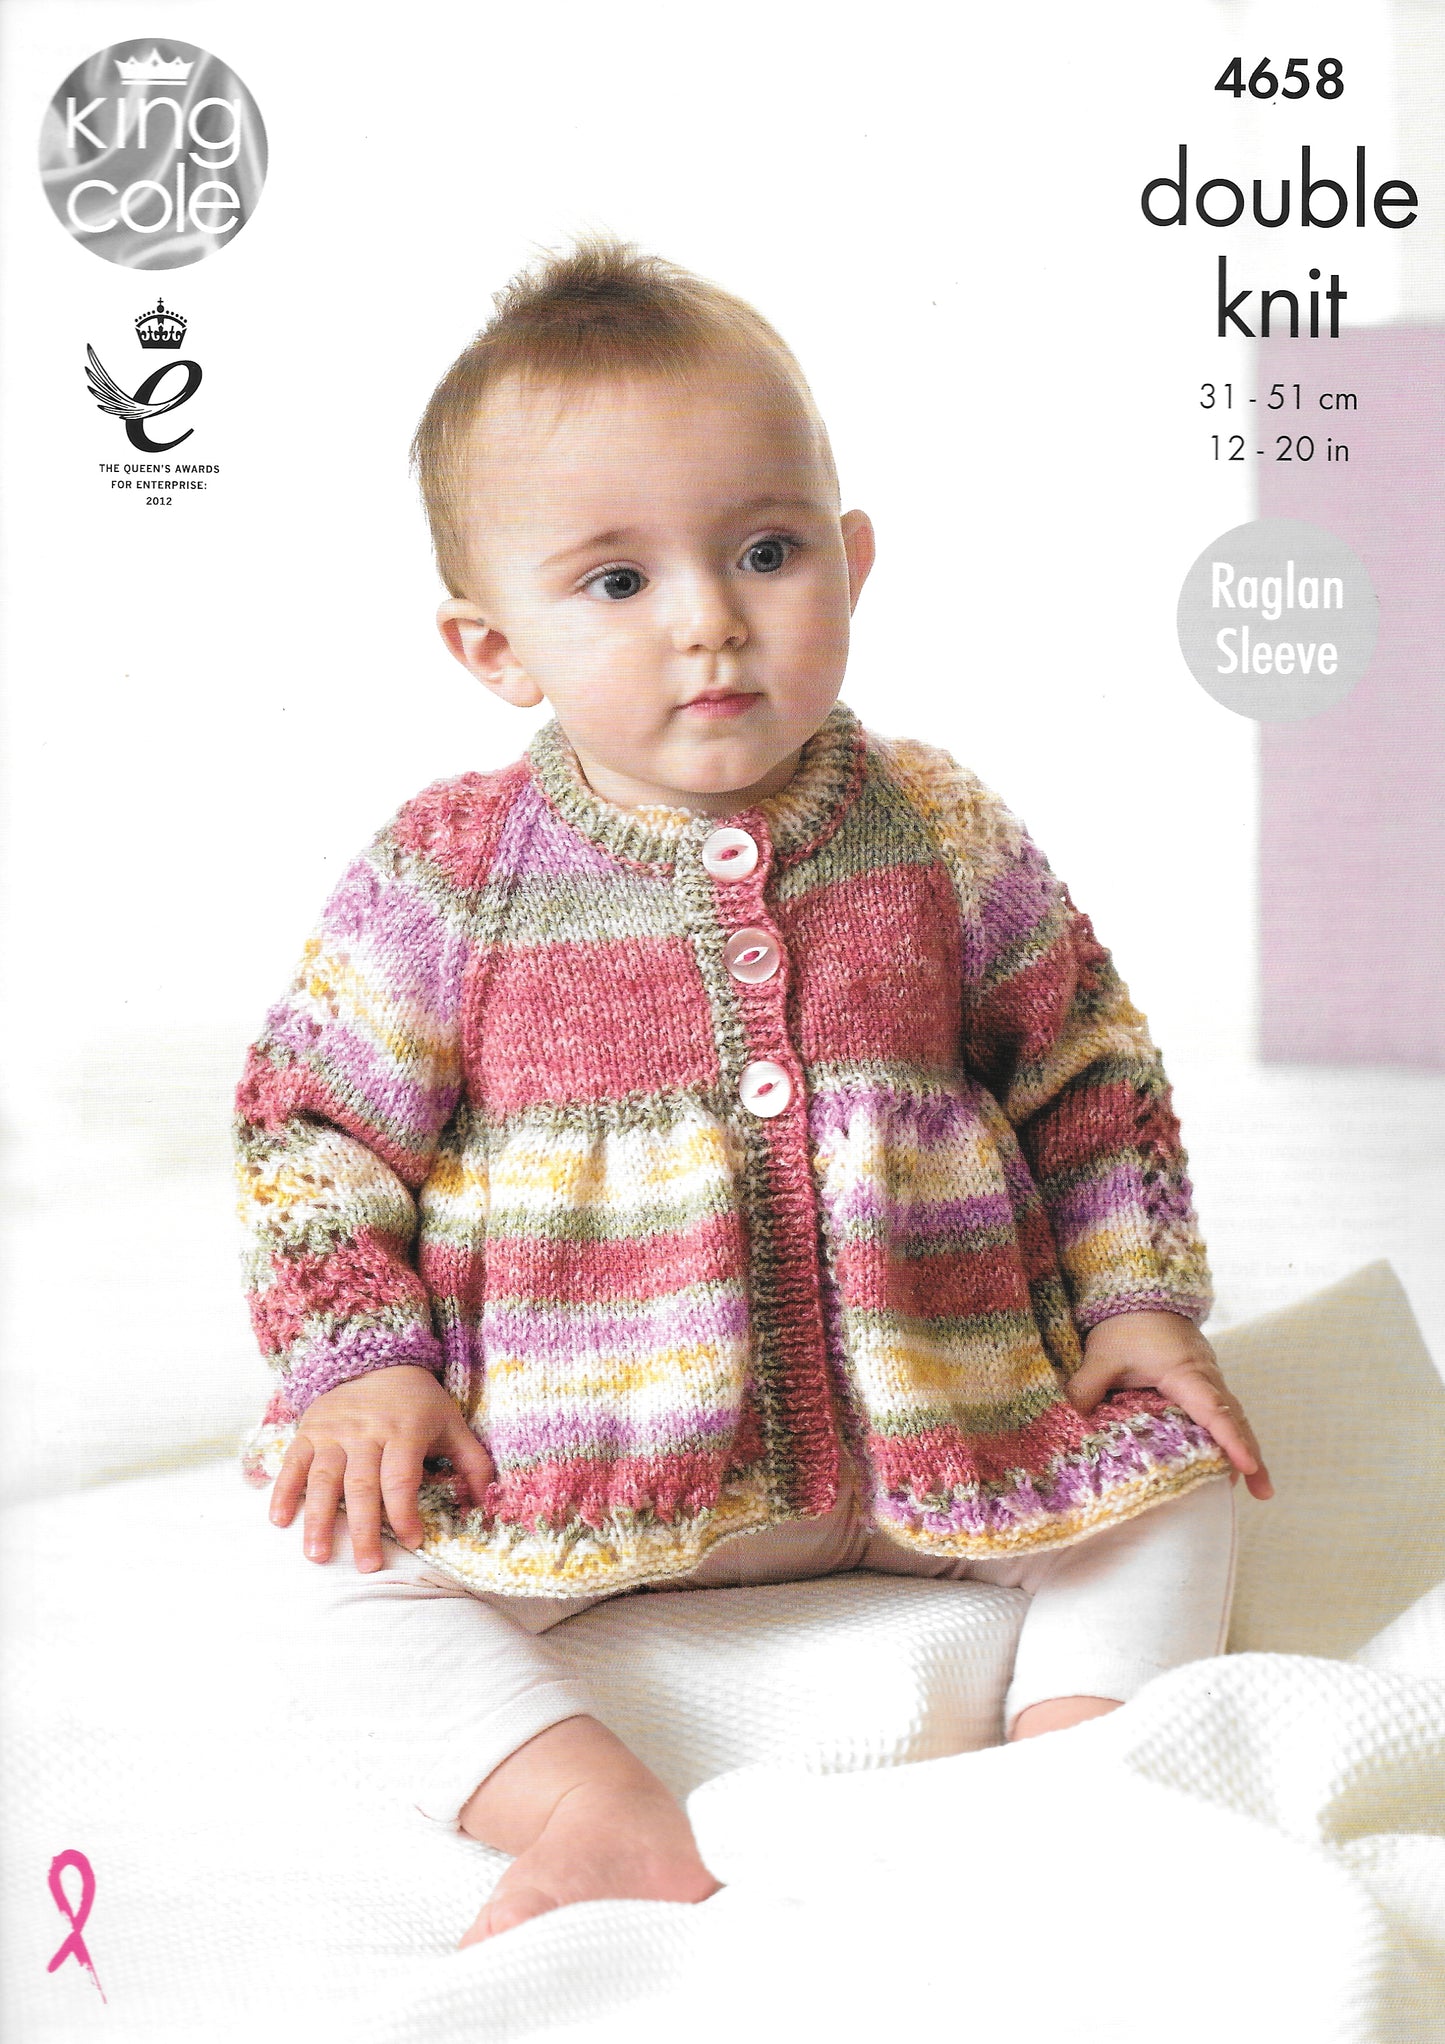 4658 King Cole Double Knit Baby Jacket and Blanket knitting pattern